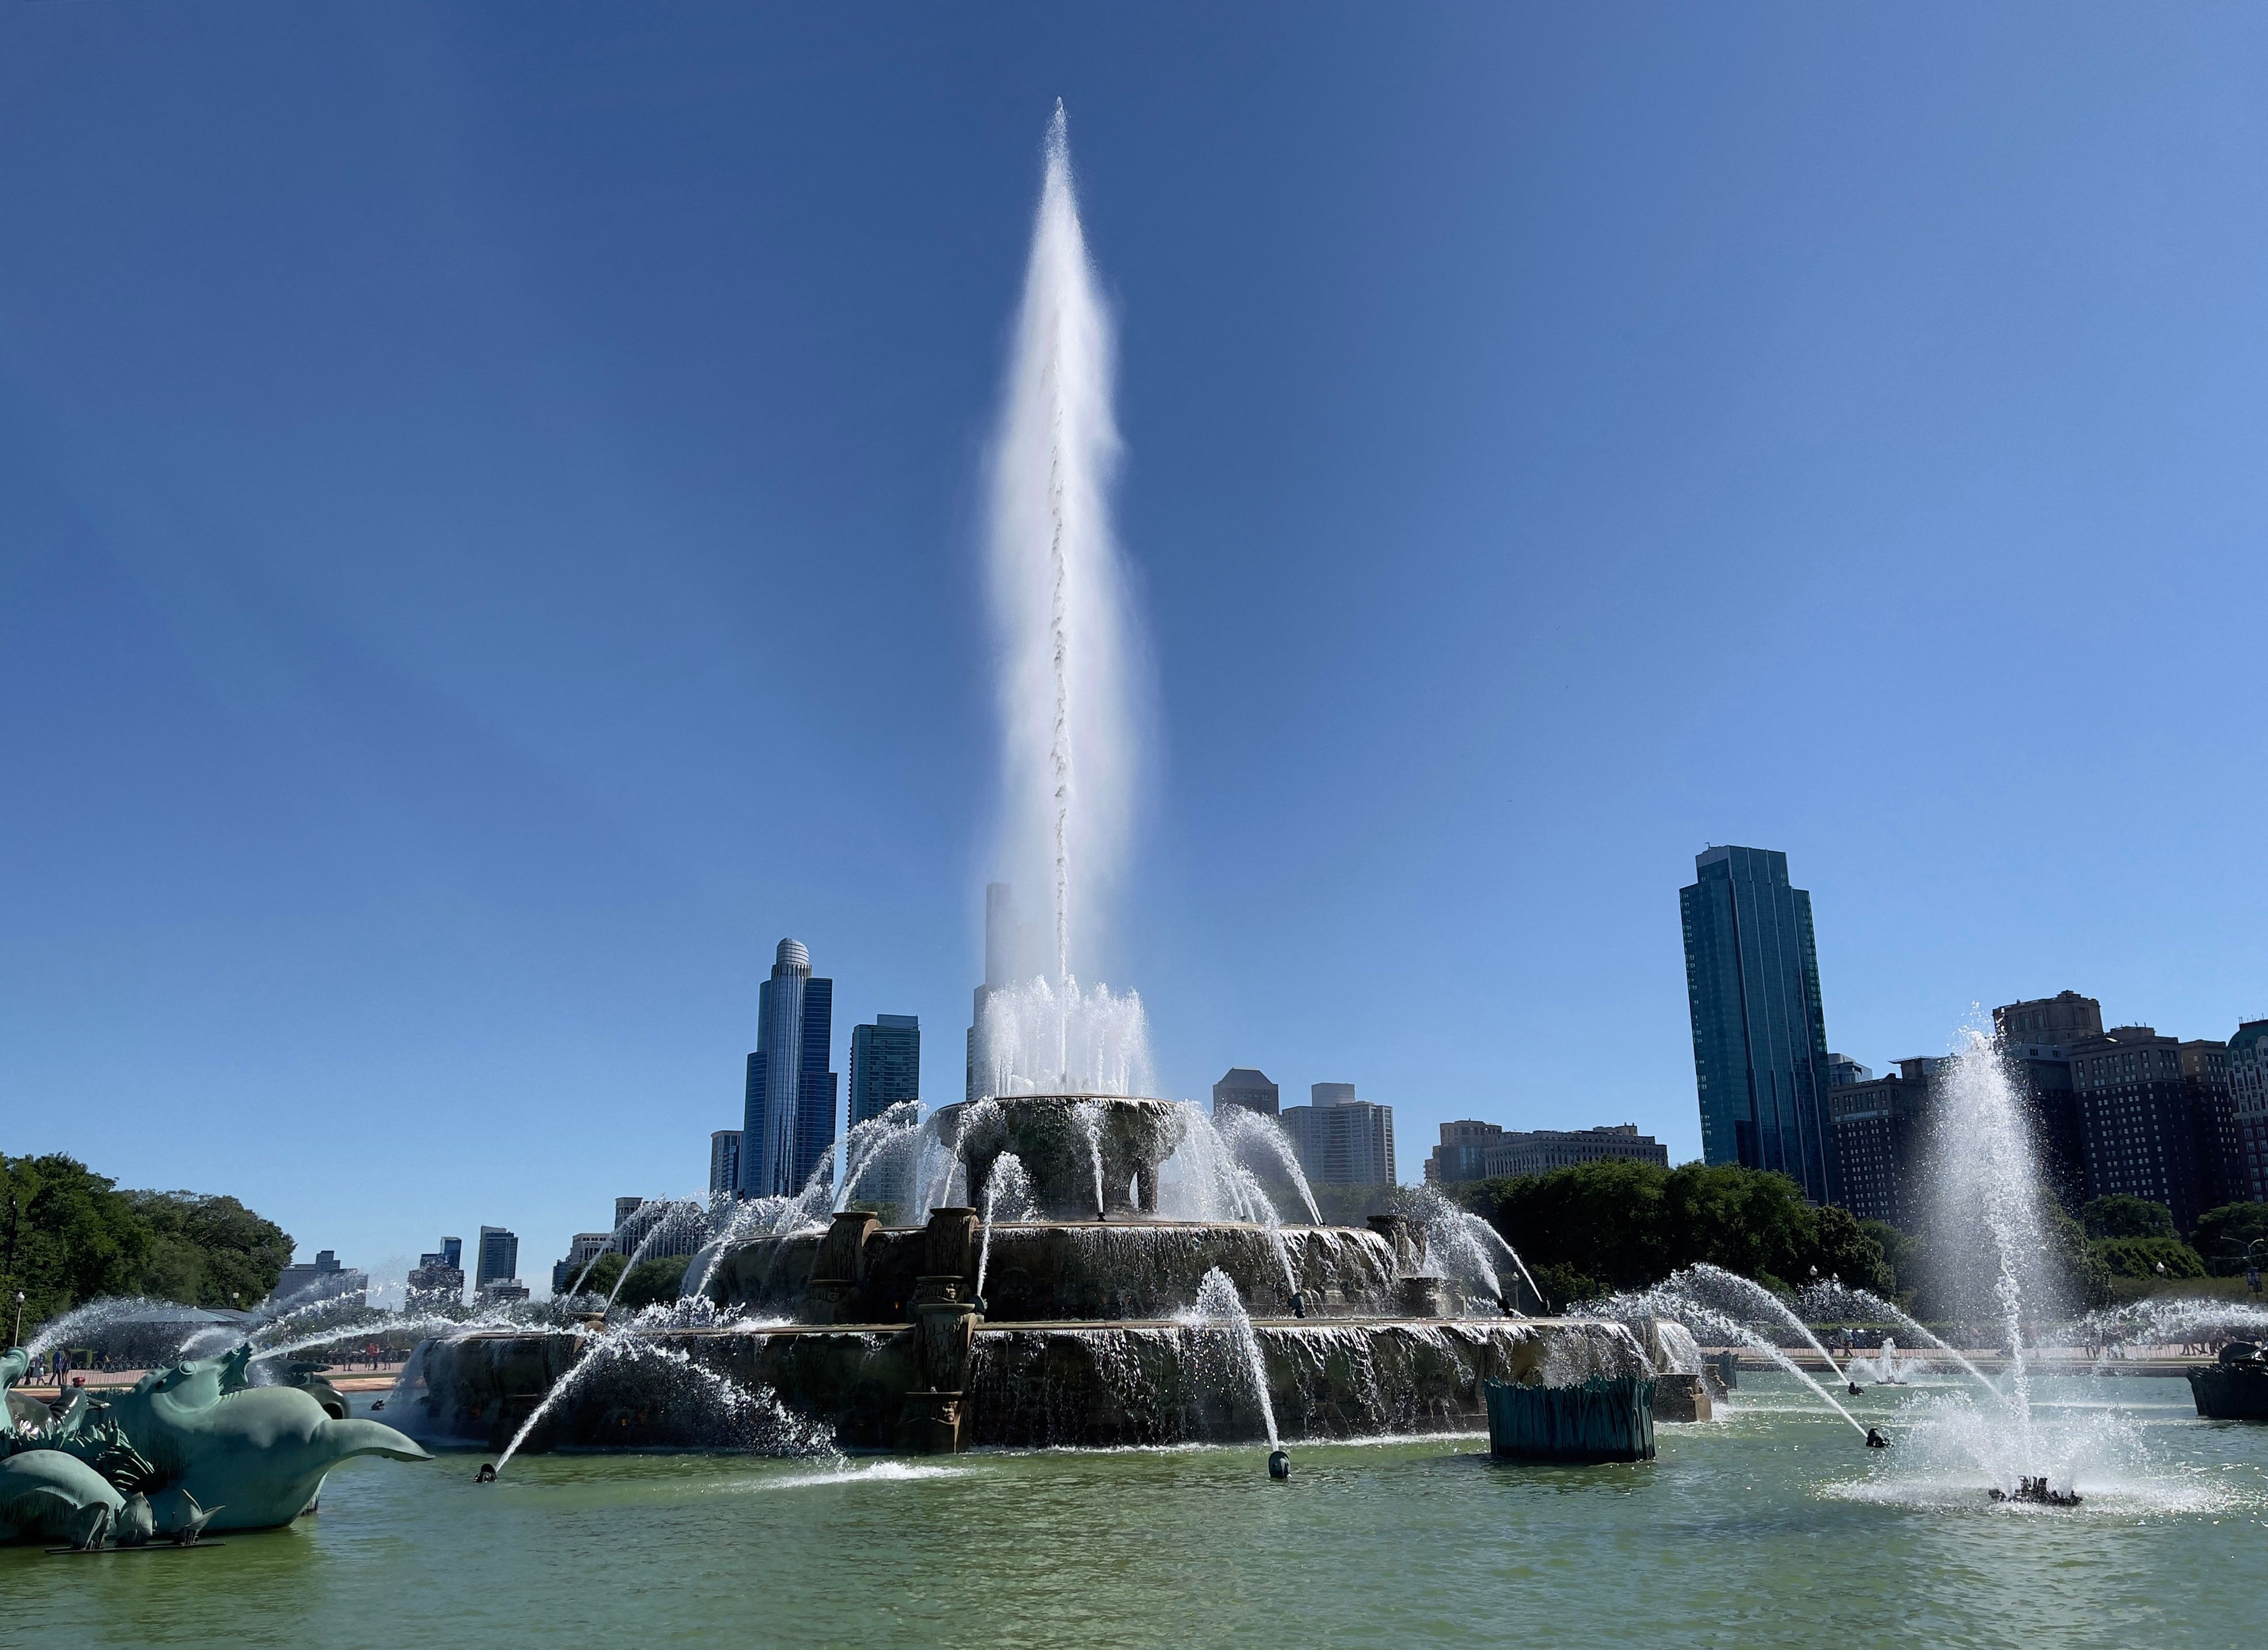 Water sprays from Chicago's Buckingham Fountain in Grant Park, with the city's skyline in the background.